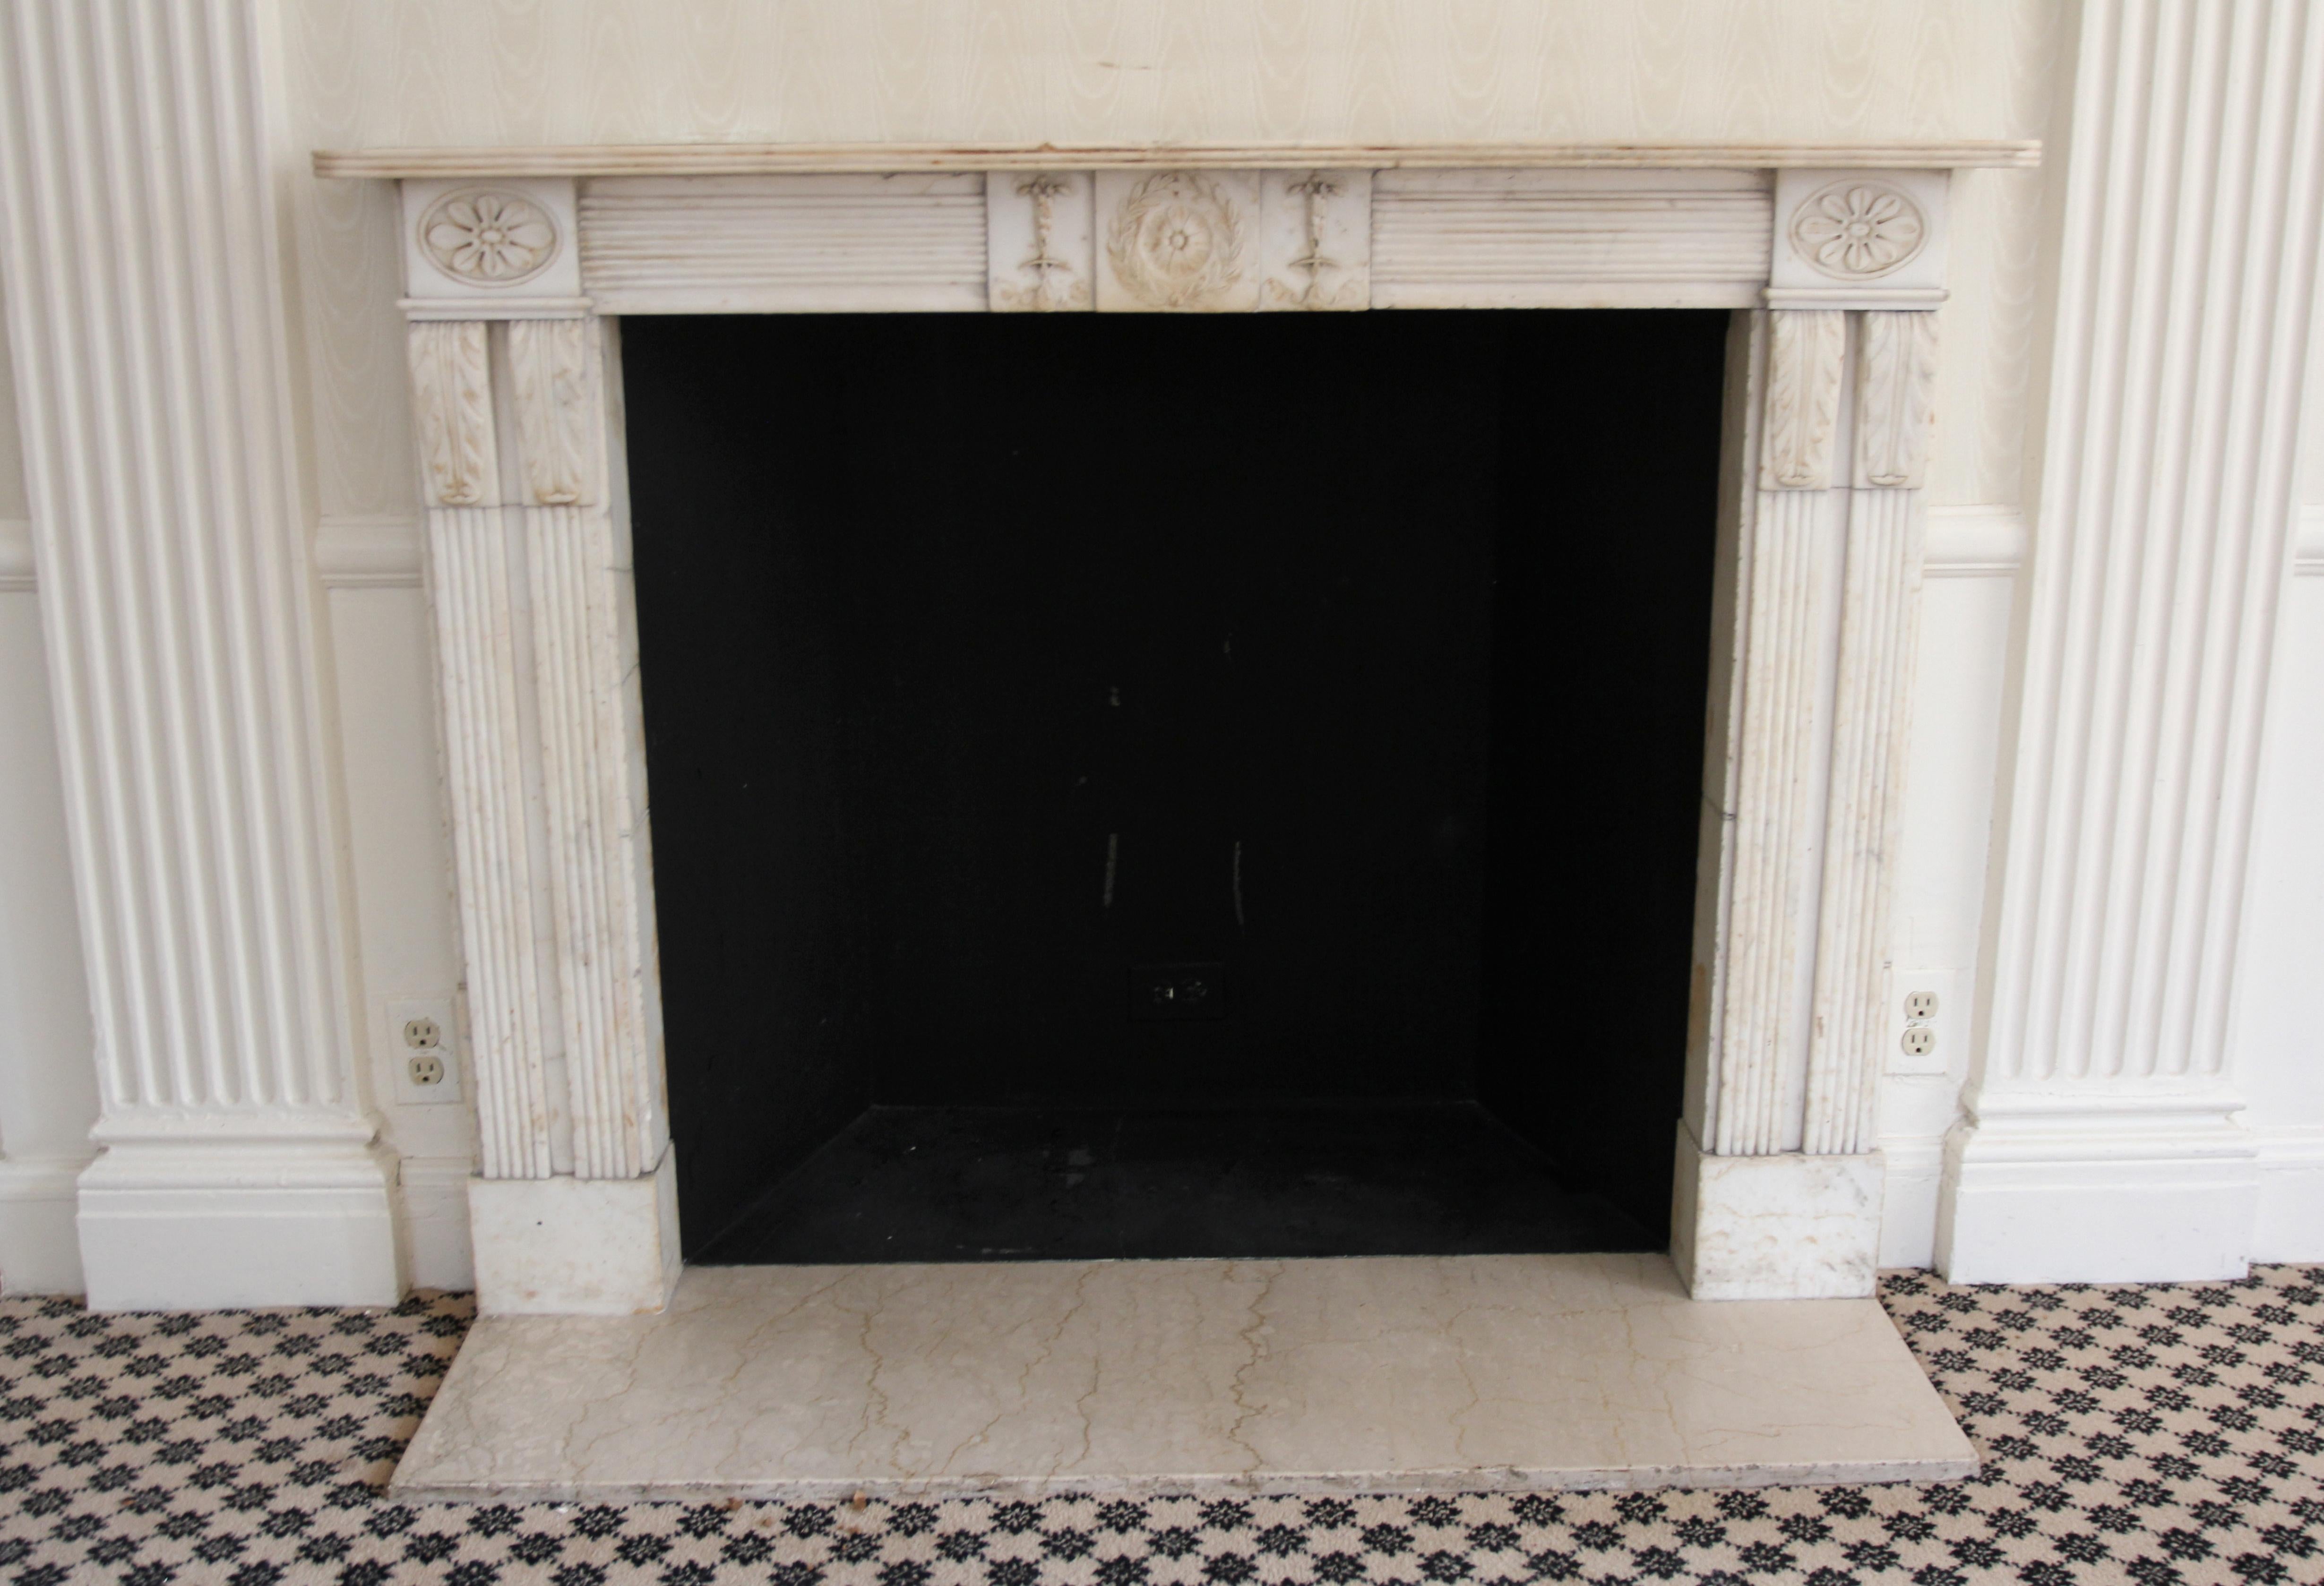 A distinguished English Regency statuary marble mantel from the 1810s, complemented by a newly introduced hearth. The marble maintains its commendable condition, boasting captivating embellishments featuring playful dancing cherubs adorning the